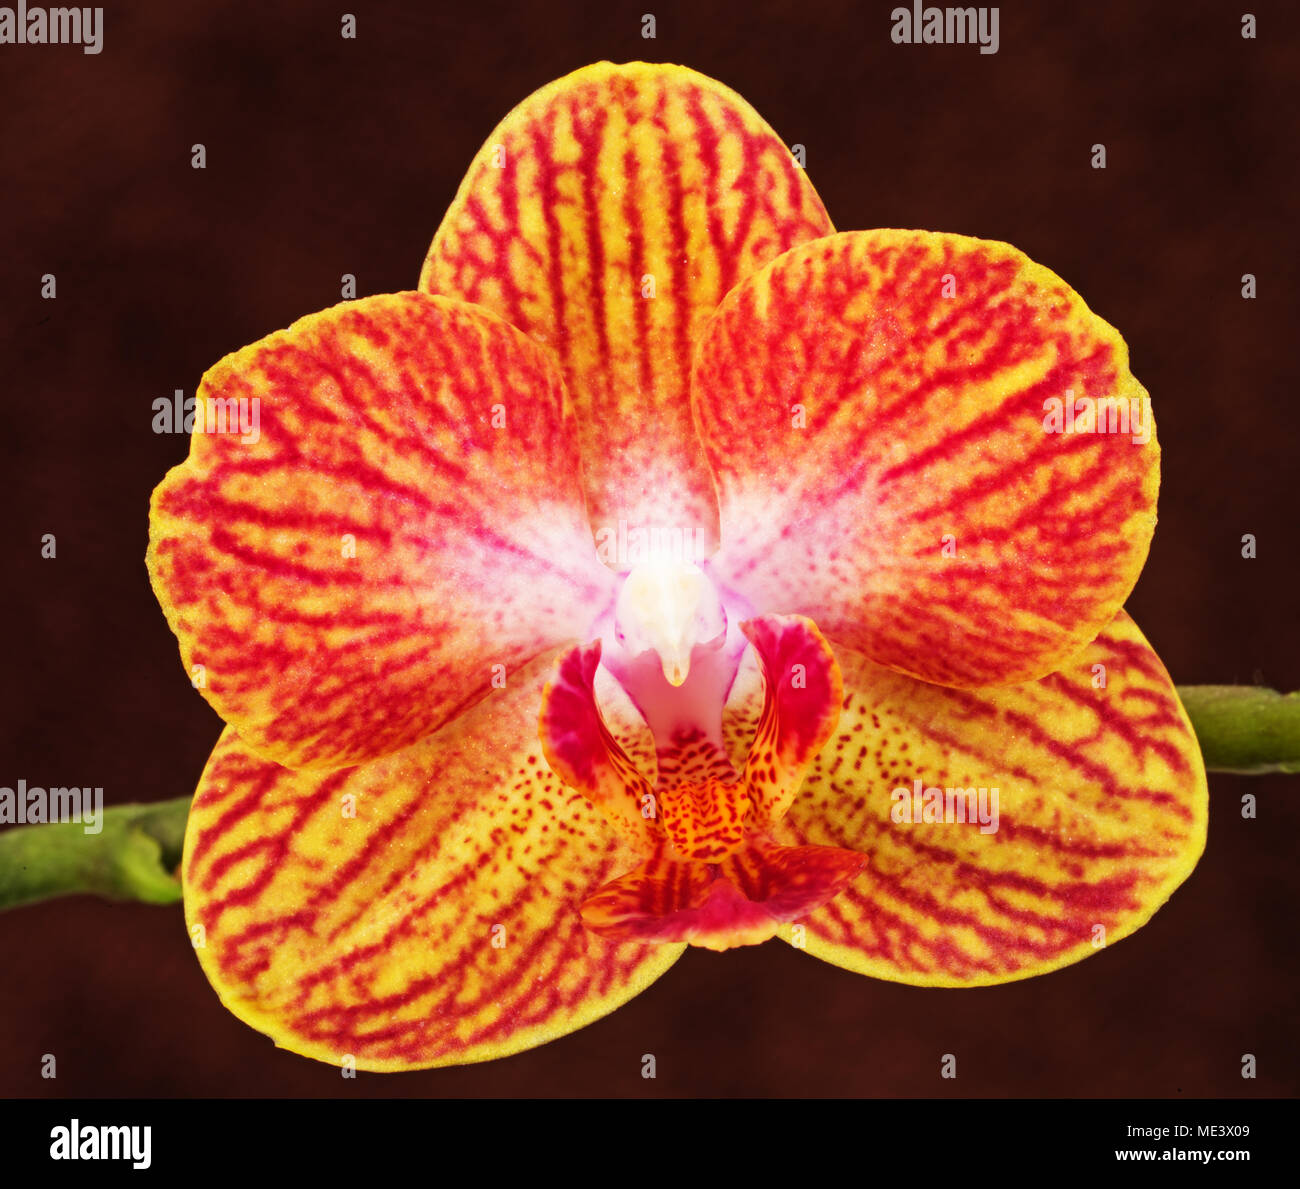 yellow pink and red phalaenopsis orchid flower on brown background Stock Photo